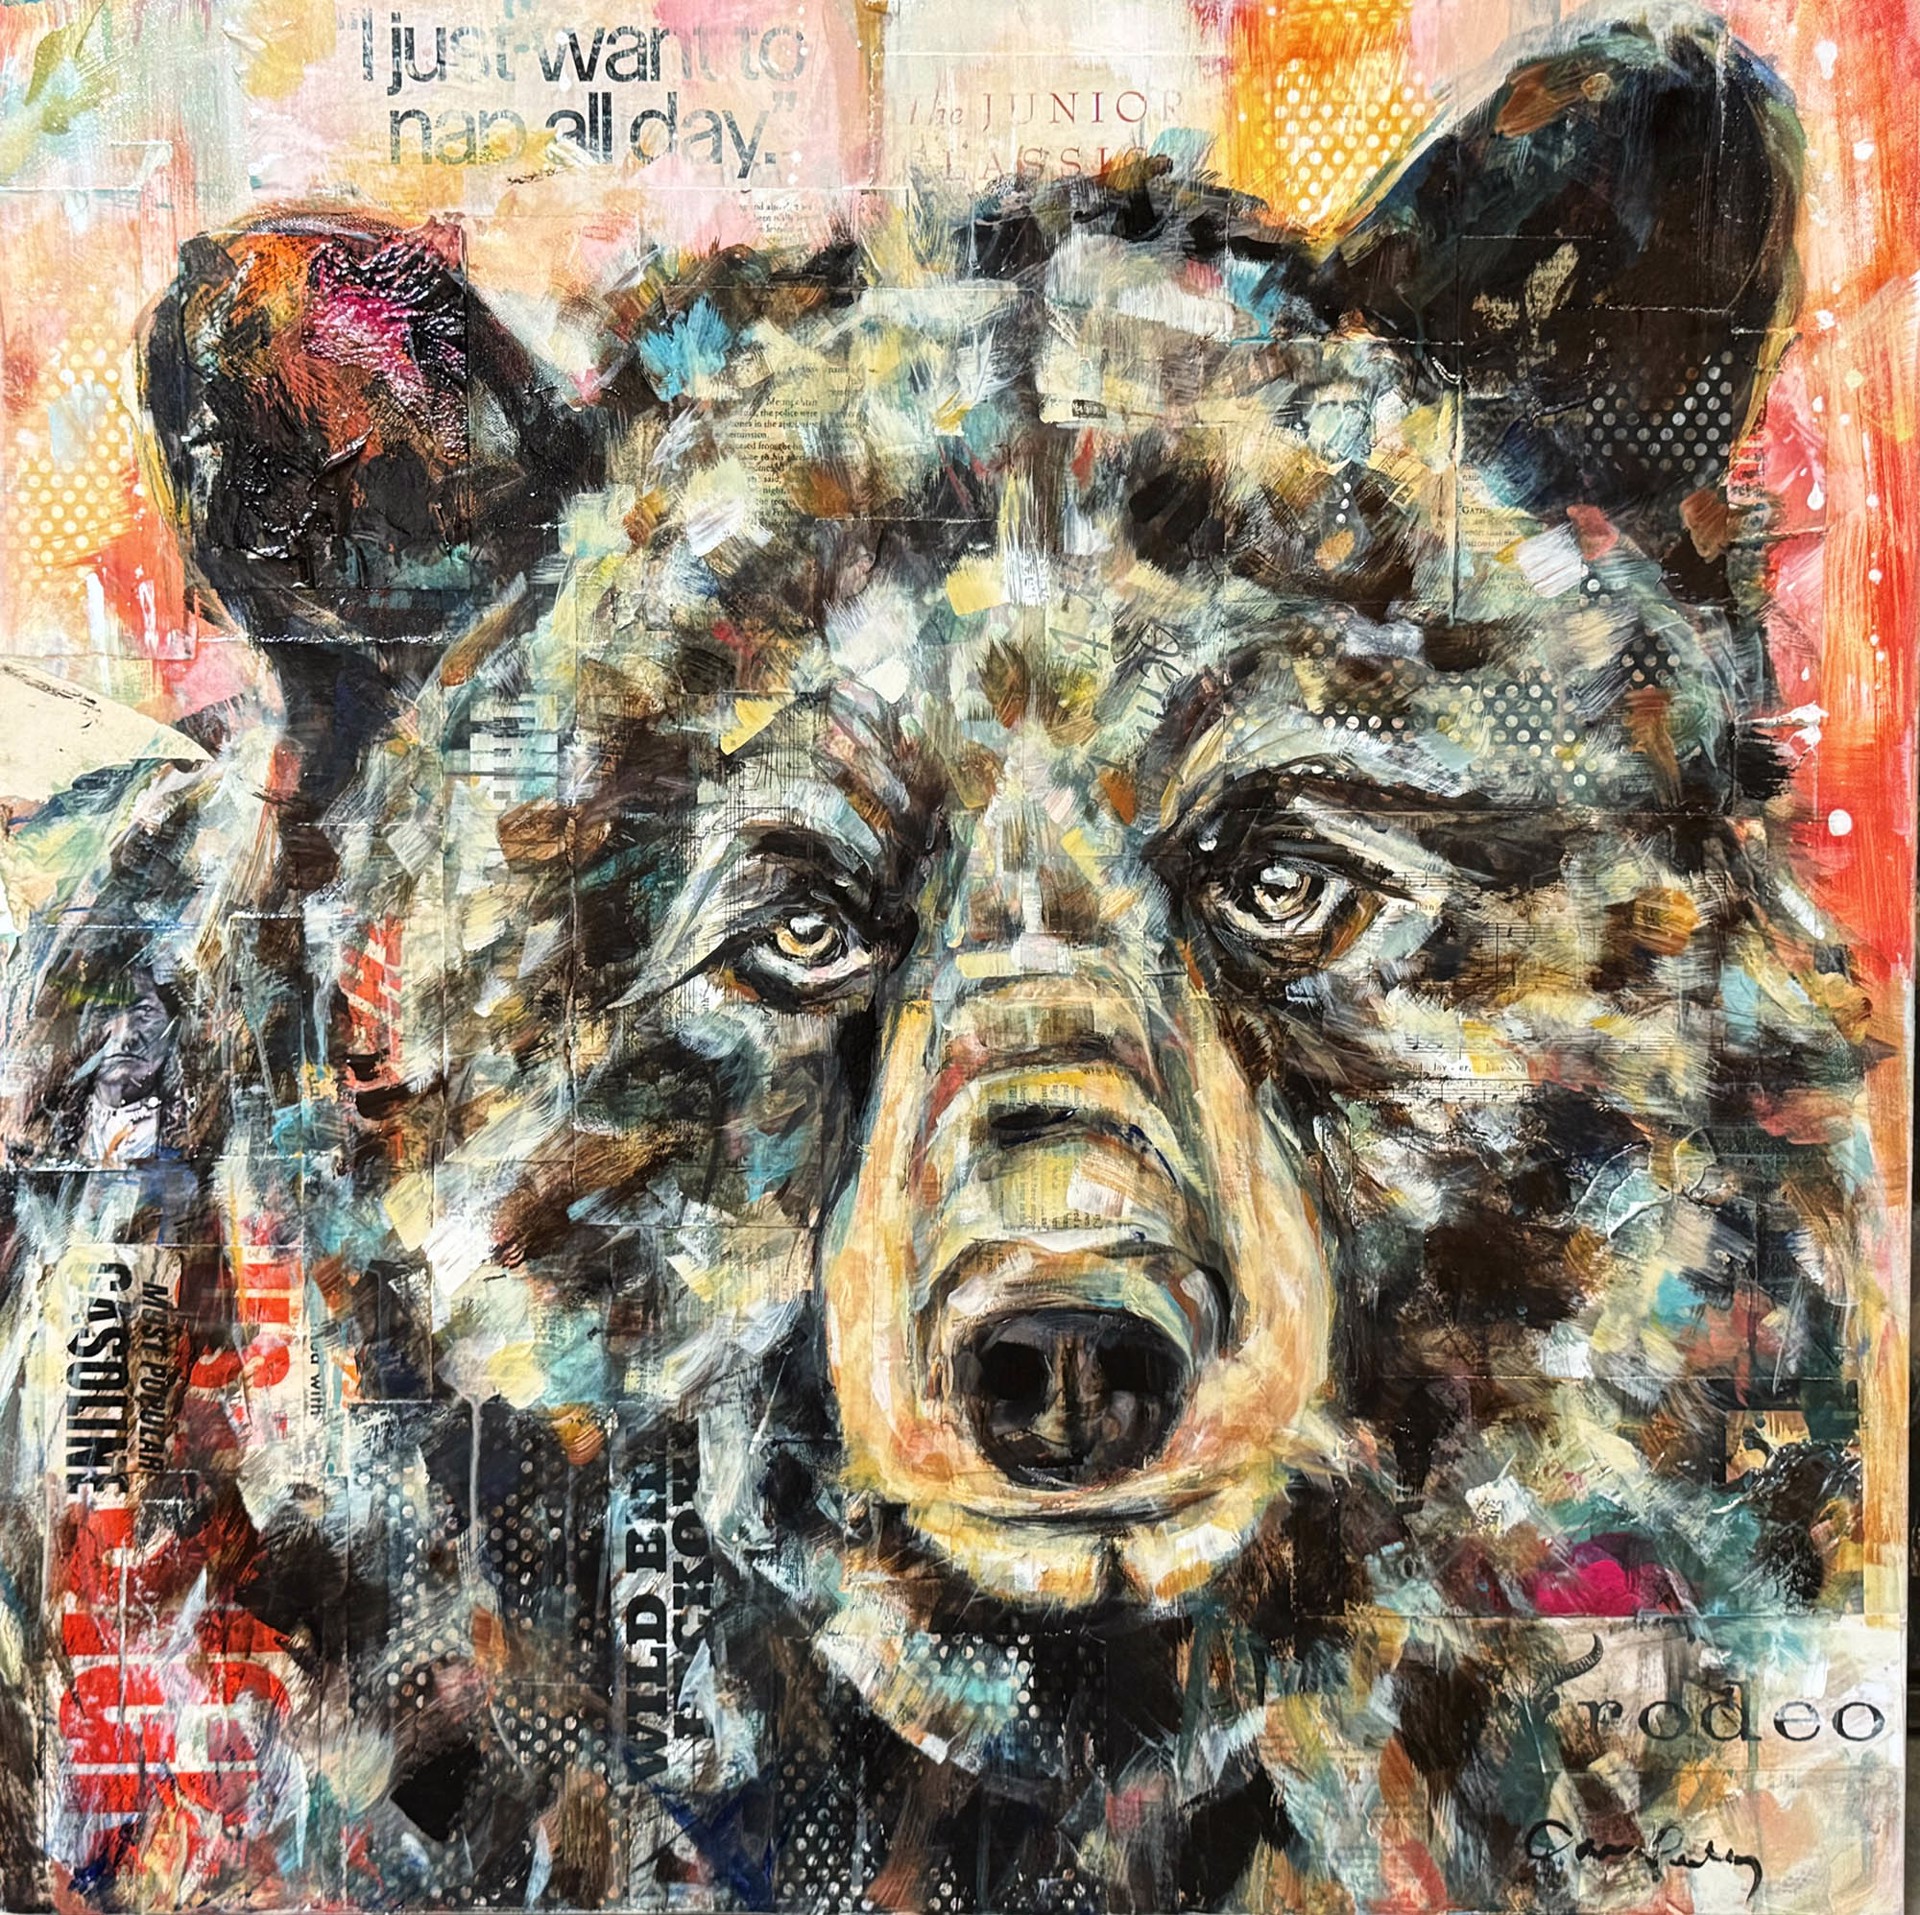 Original Mixed Media Painting By Carrie Penley Featuring a Grizzly Bear With Collage Detail